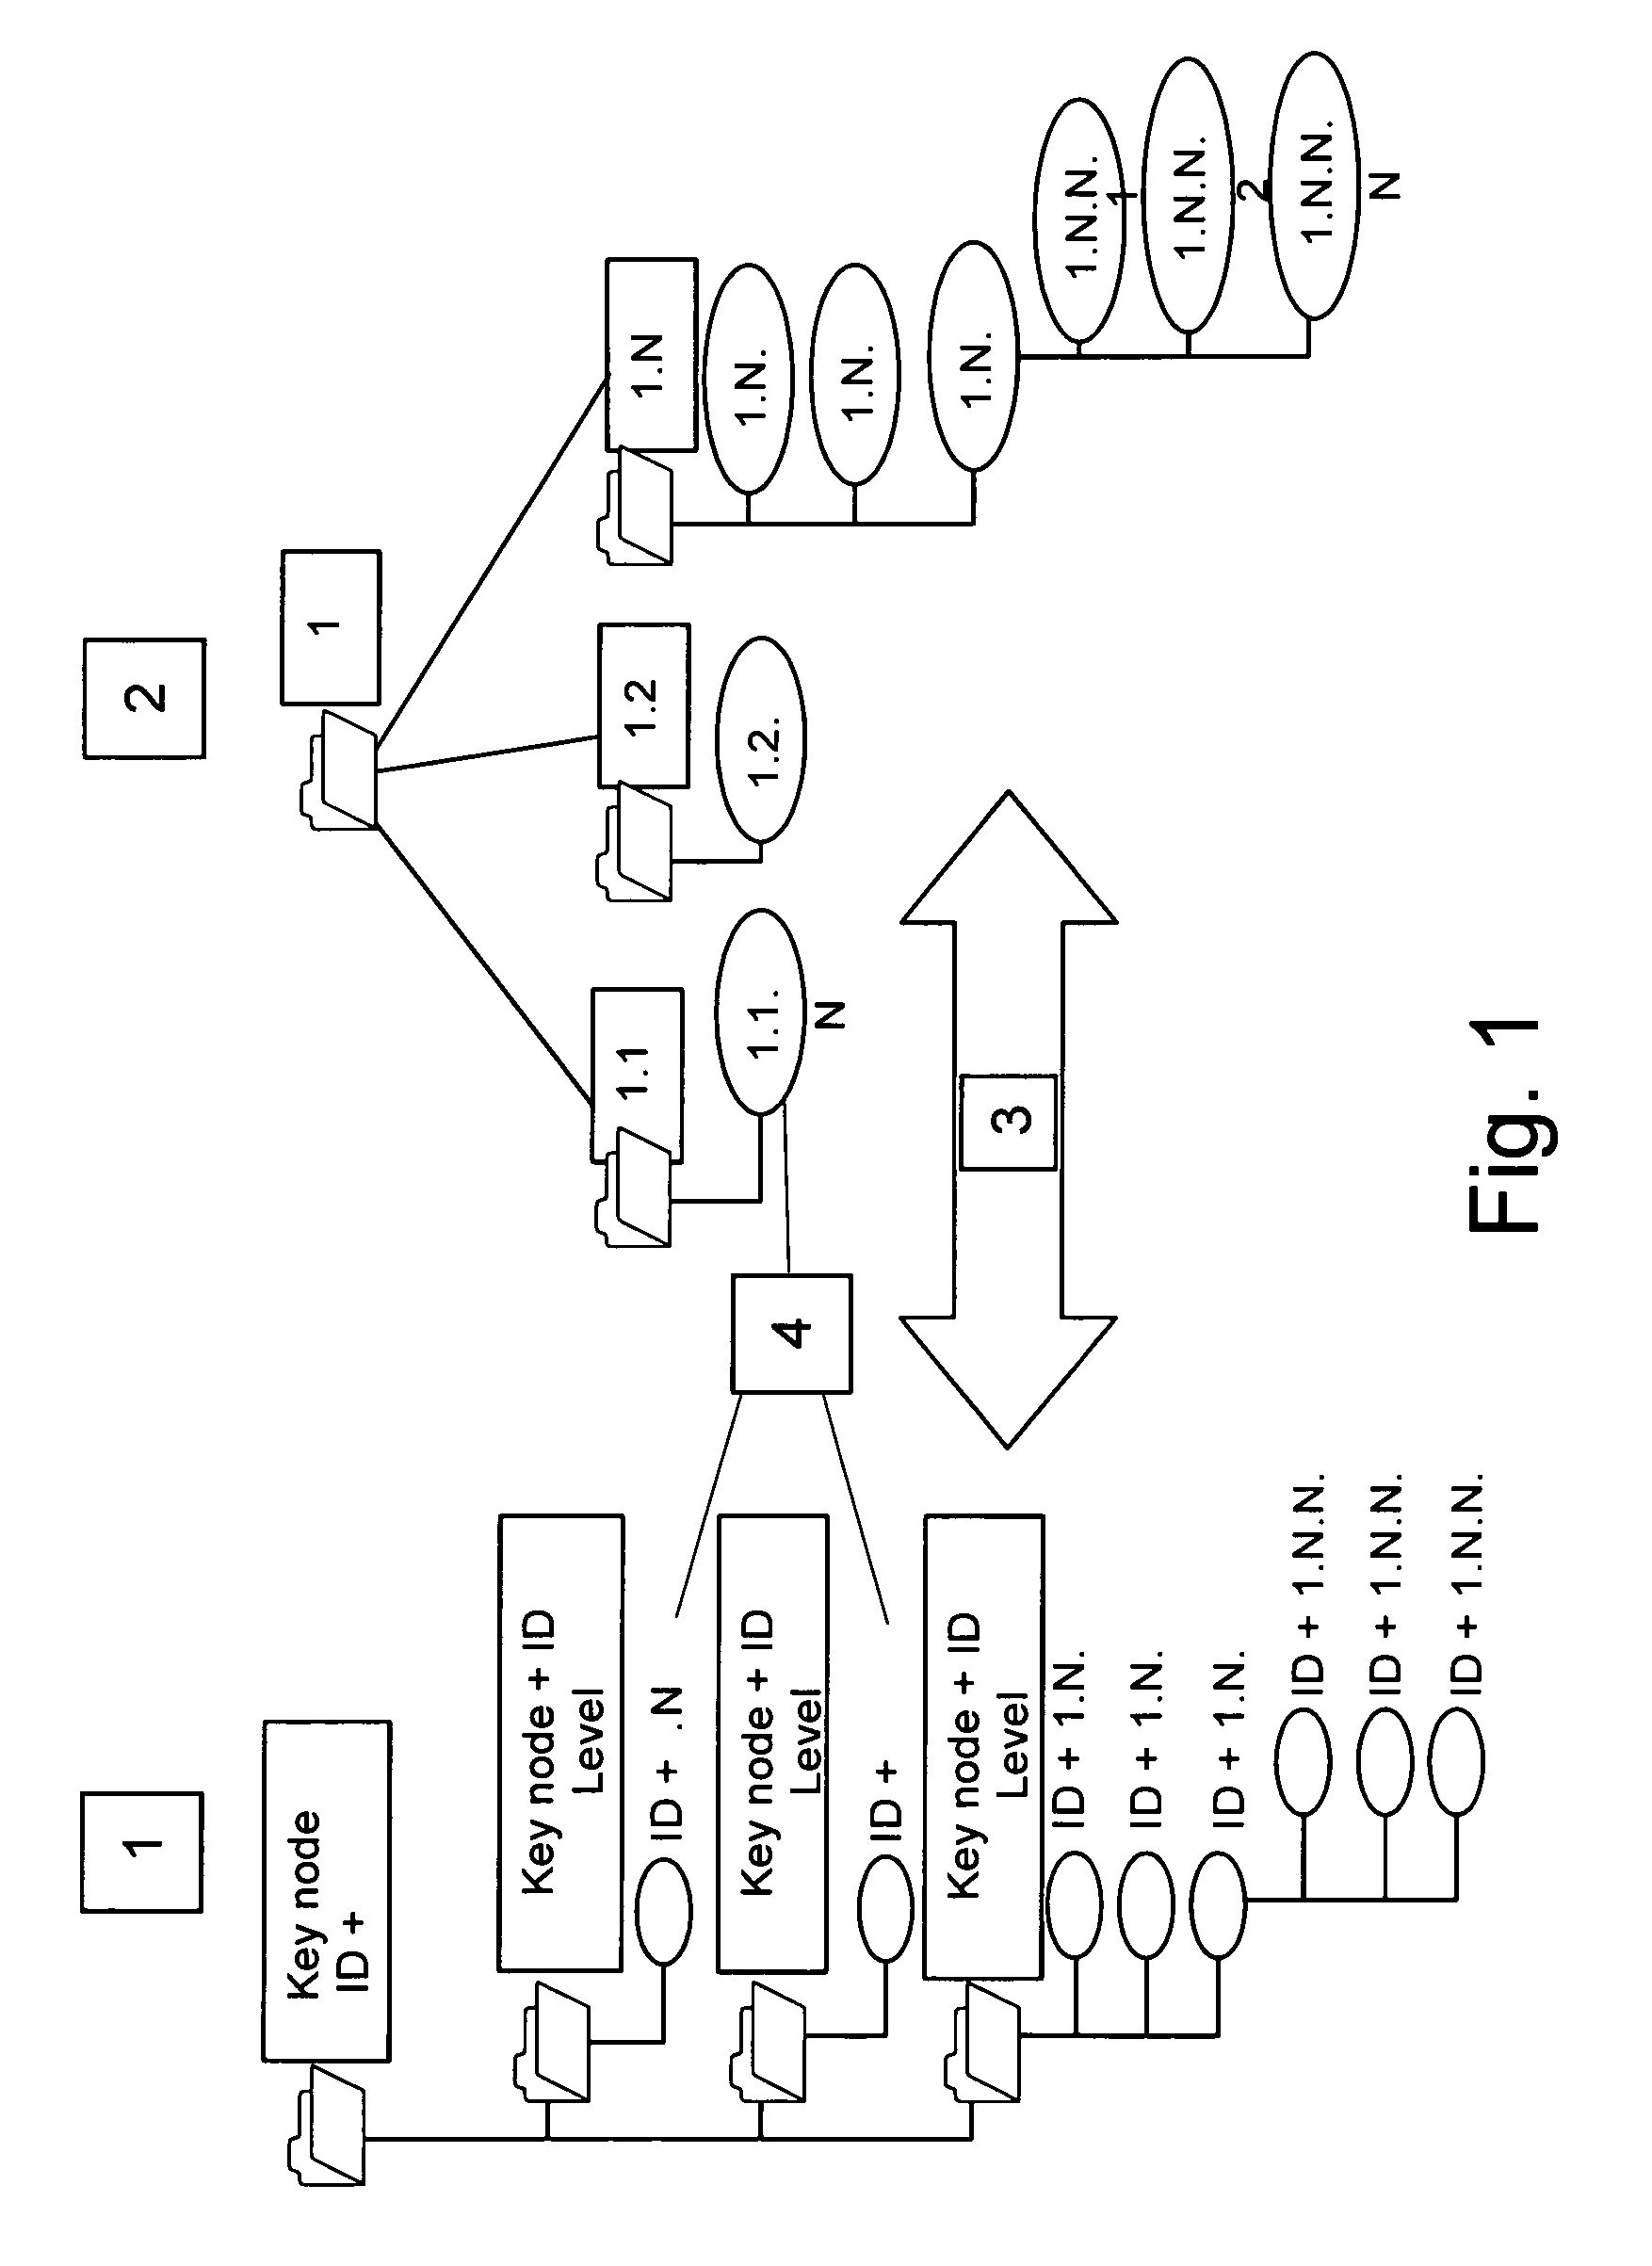 Method for Improving the Performance in Processing an Interprocess Digital Mockup